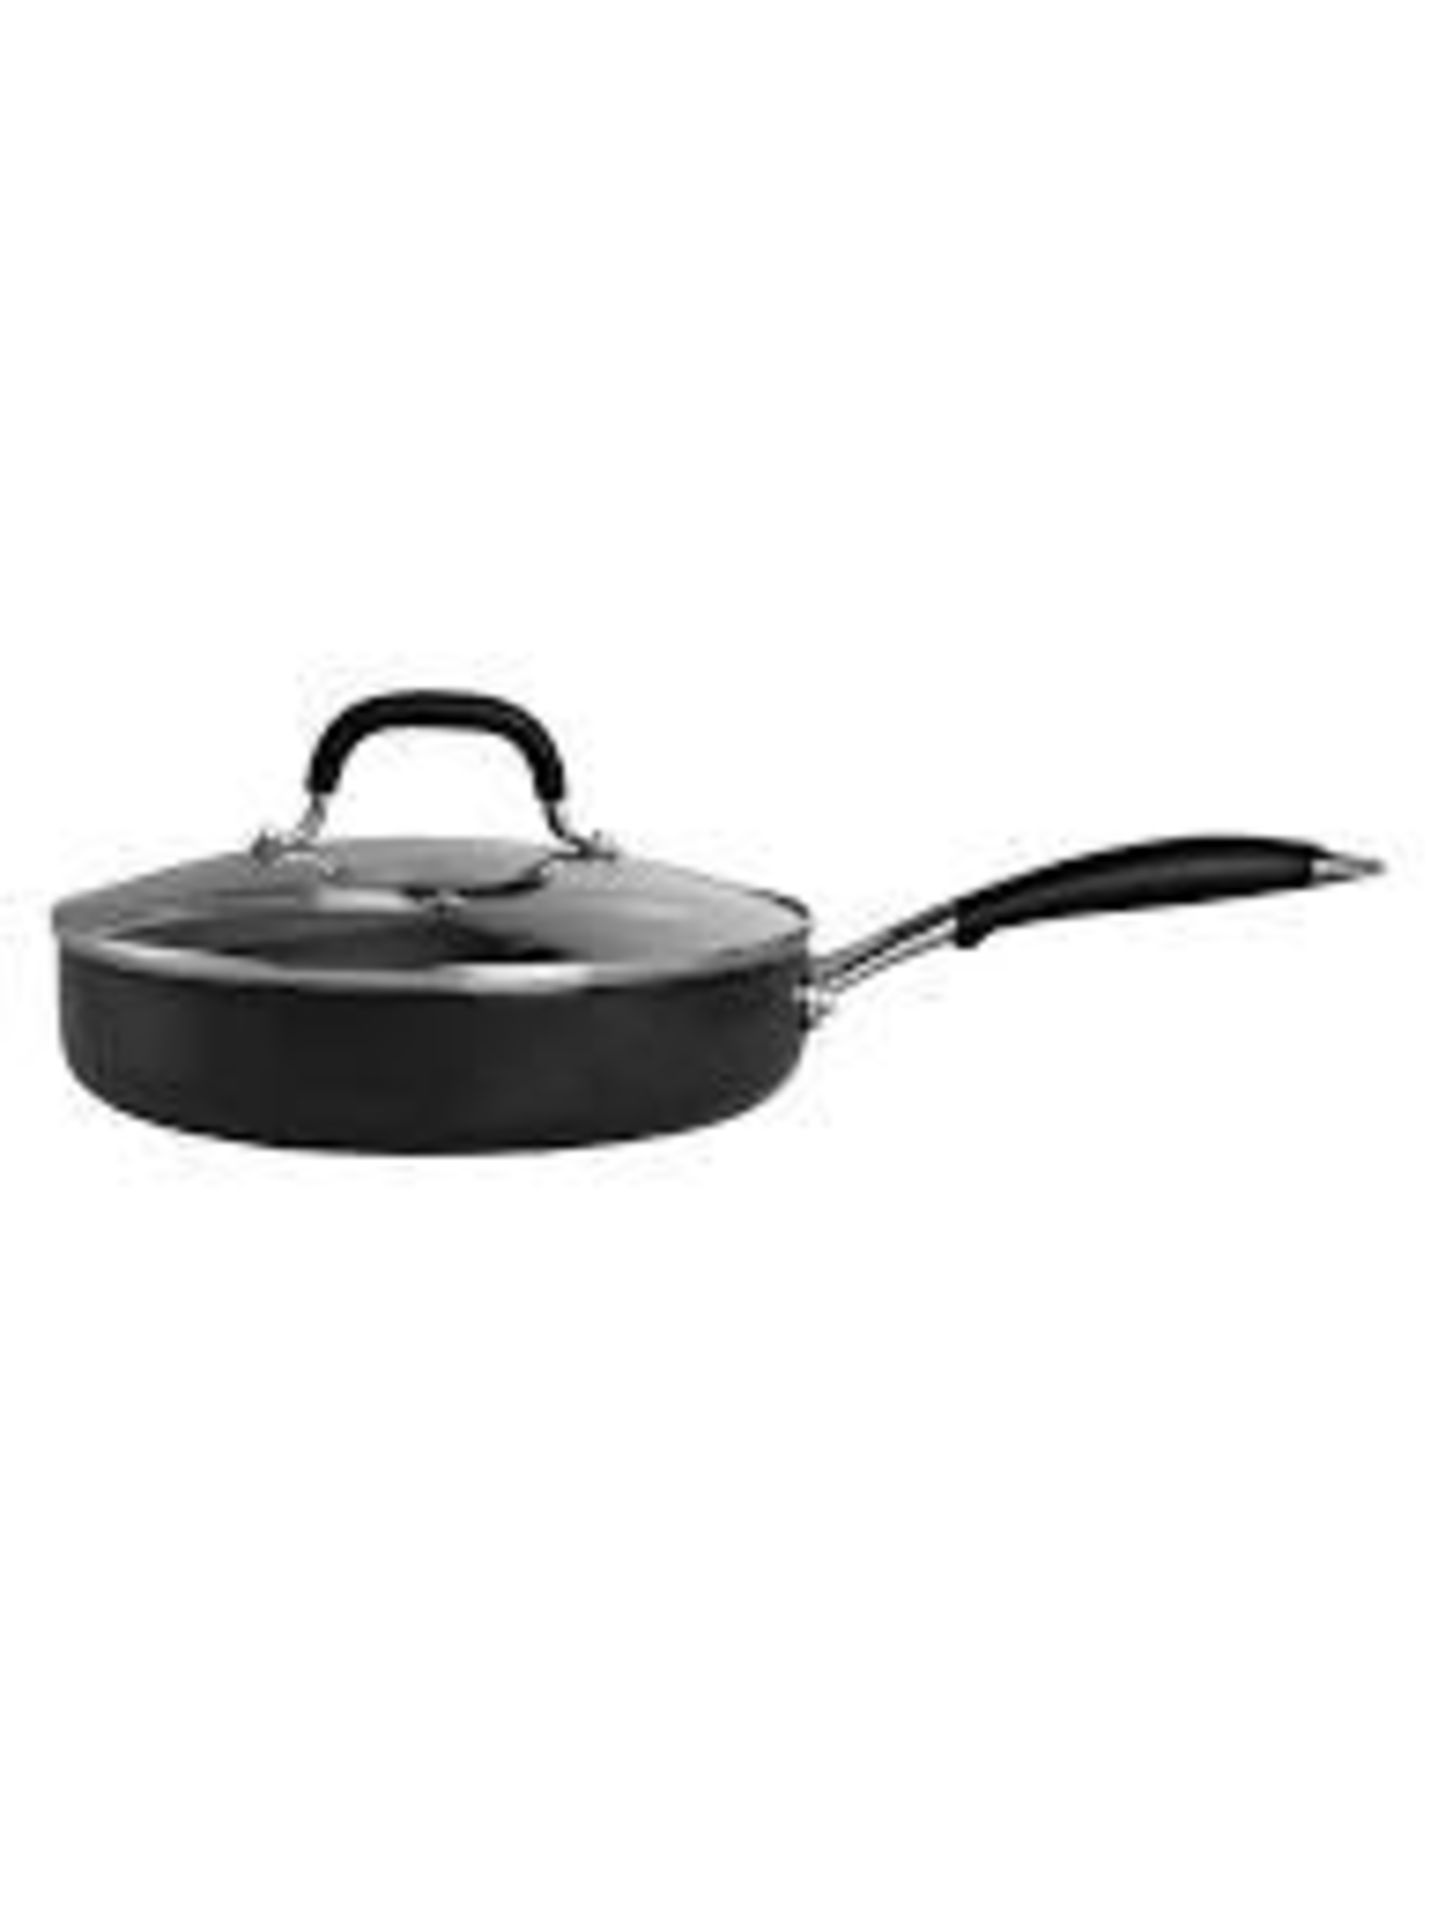 Combined RRP £180 What To Contain A Sorted John Lewis Frying Pans, John Lewis Wok And John Lewis Cas - Image 2 of 2